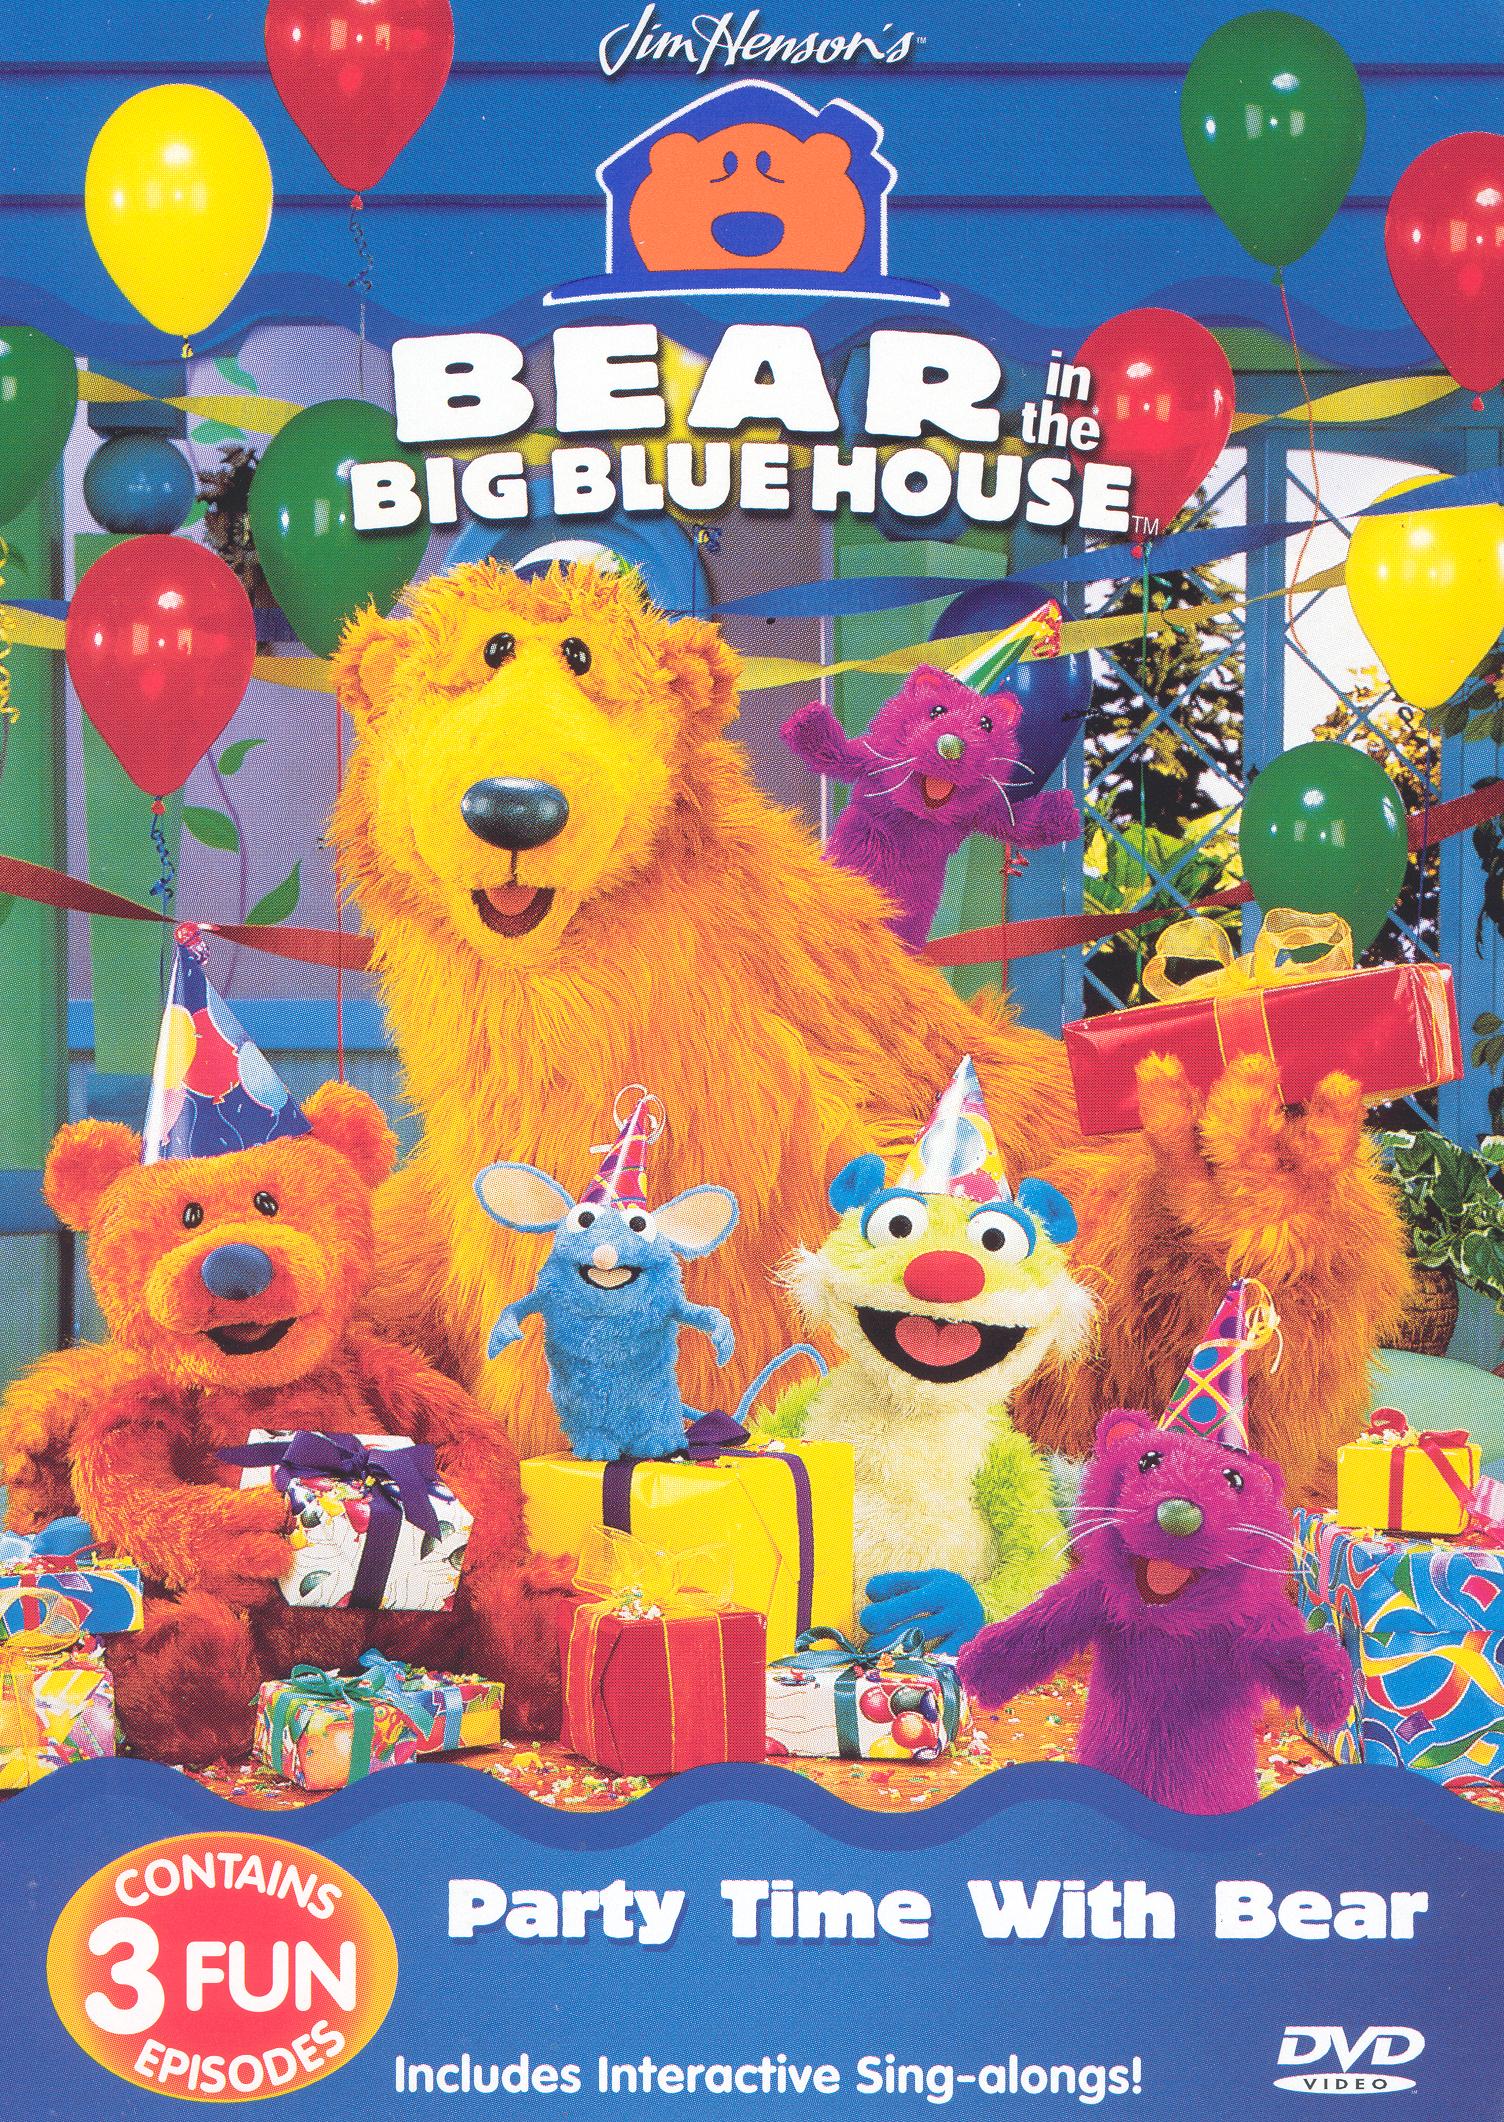 Bear in the Big Blue House: Party Time With Bear DVD - Best Buy.